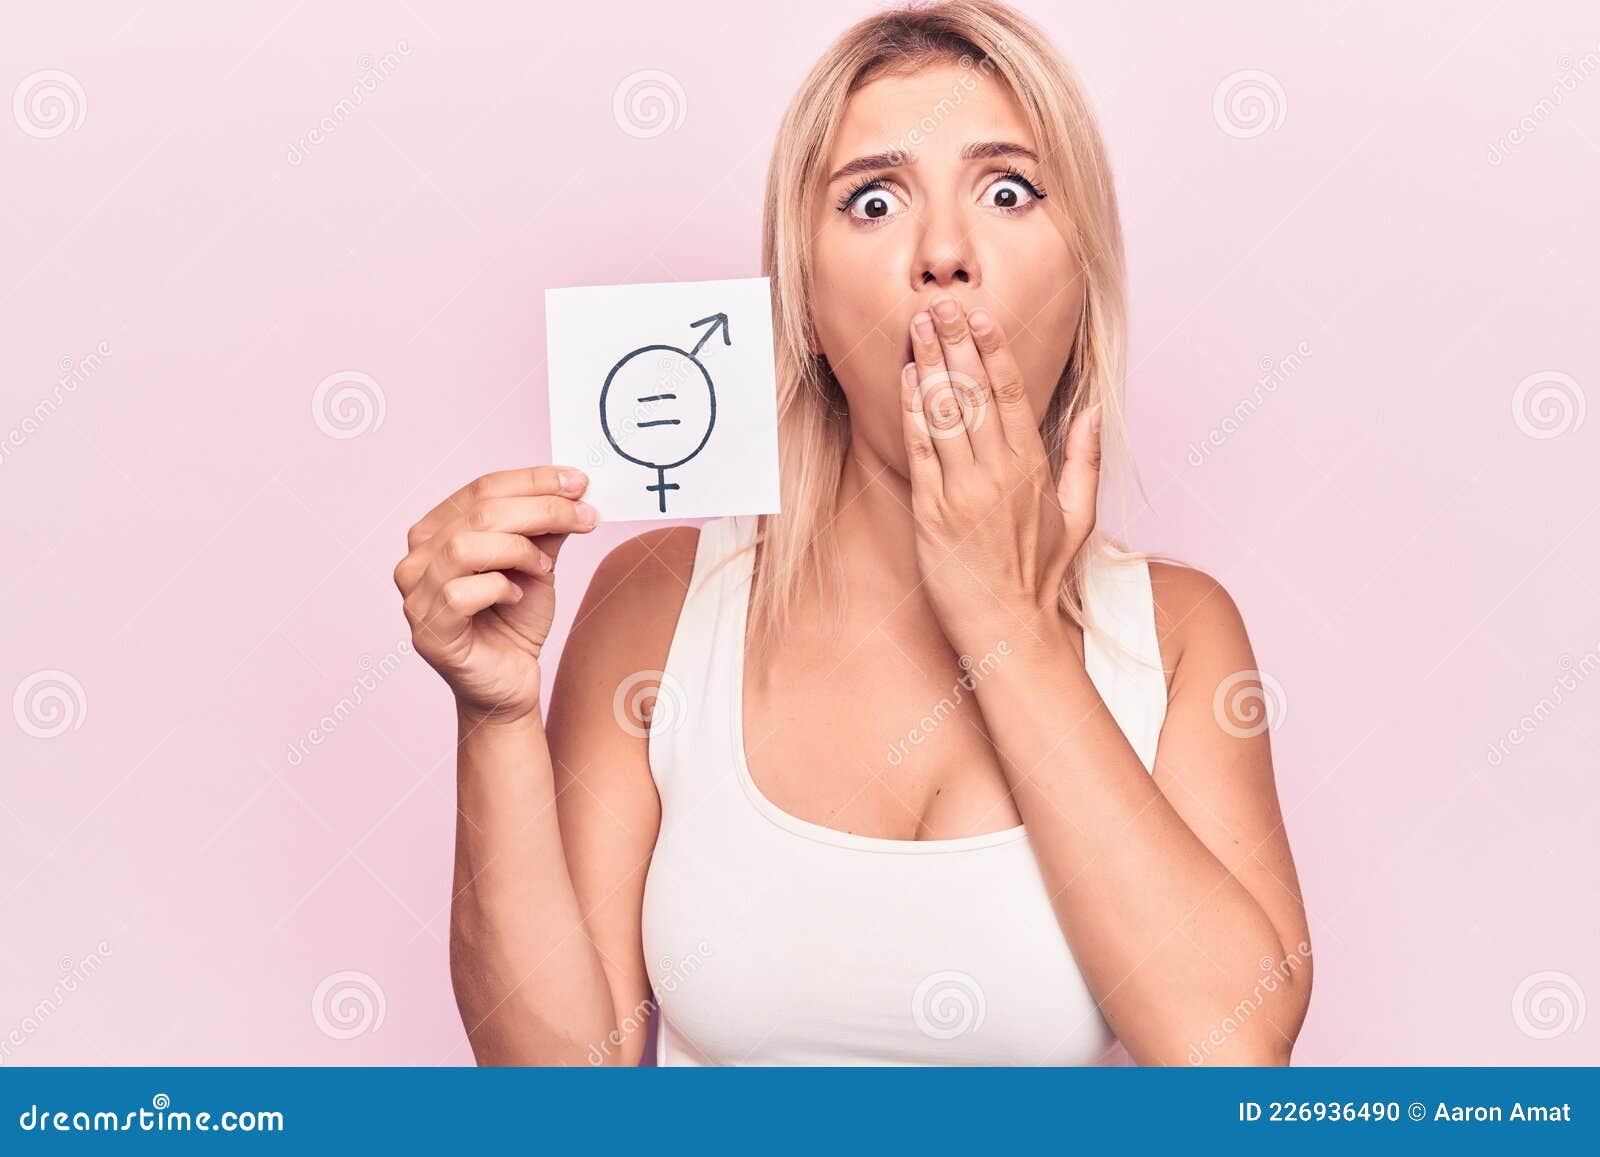 Young Blonde Woman Asking for Sex Discrimination Holding Paper with Gender Equality Message Covering Mouth with Hand, Shocked and Stock Photo image image